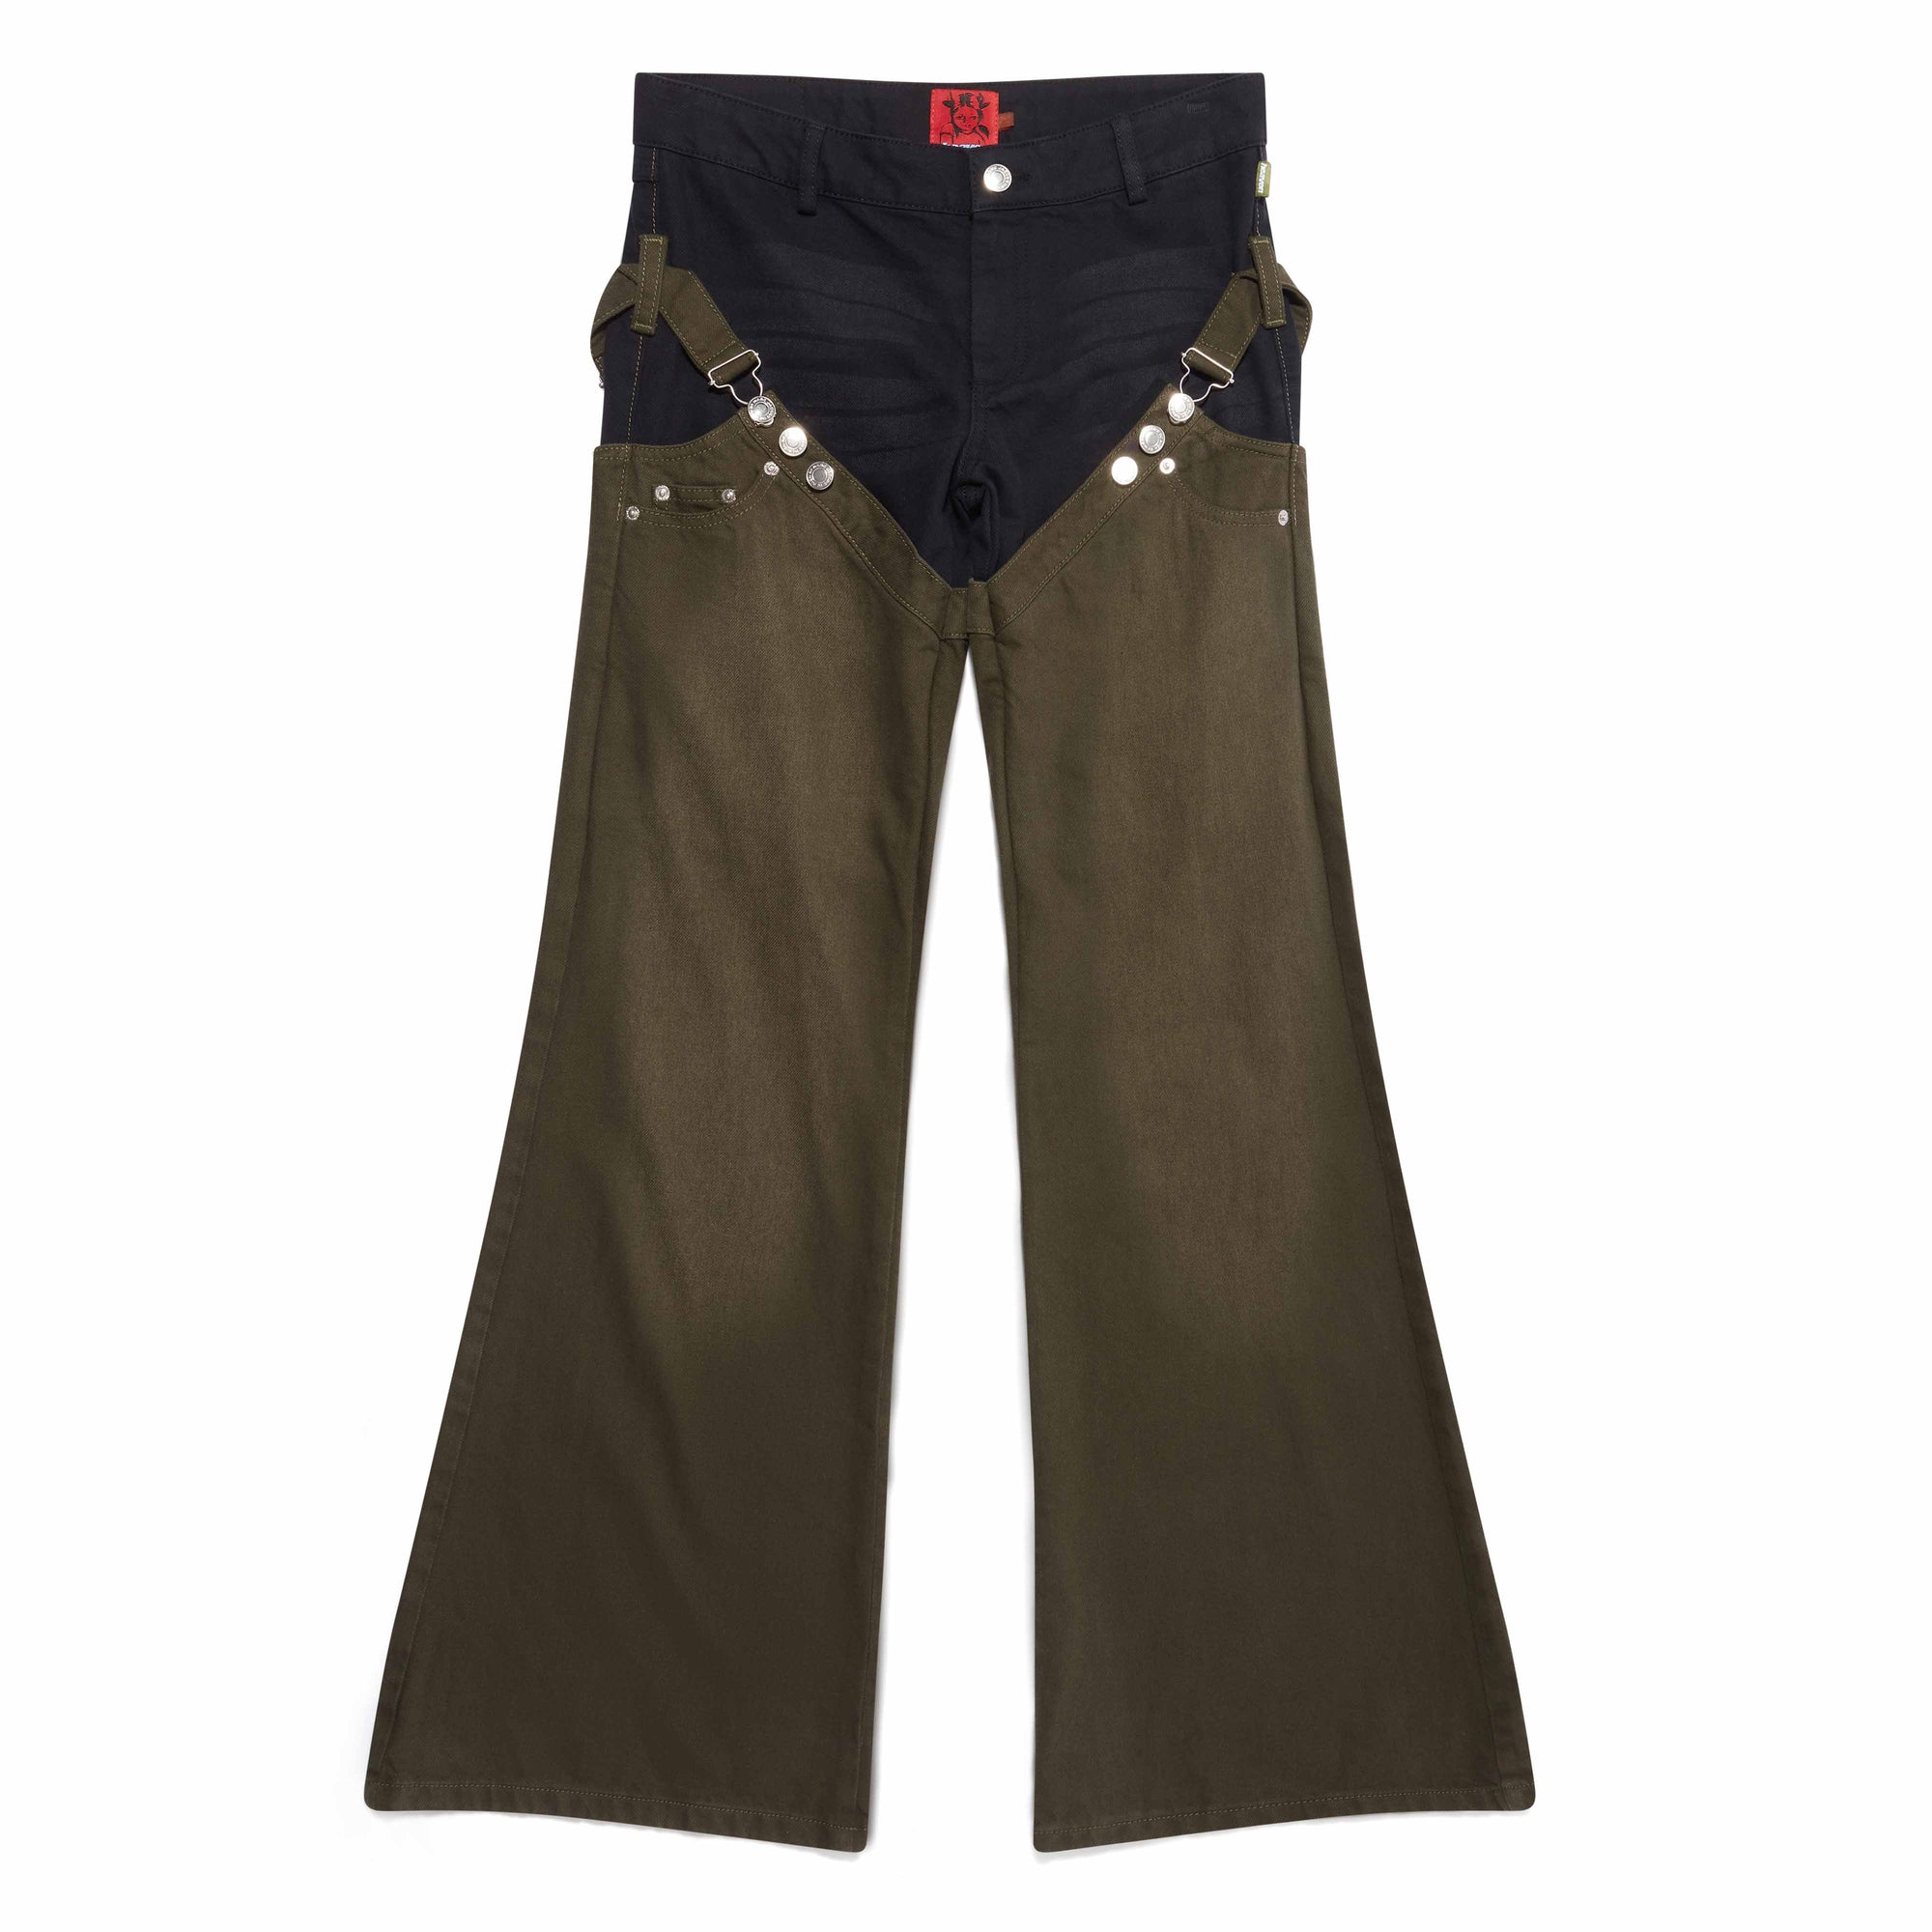 Heaven by Marc Jacobs - Women’s Chaps Flare Pants - (Olive/Black) view 1